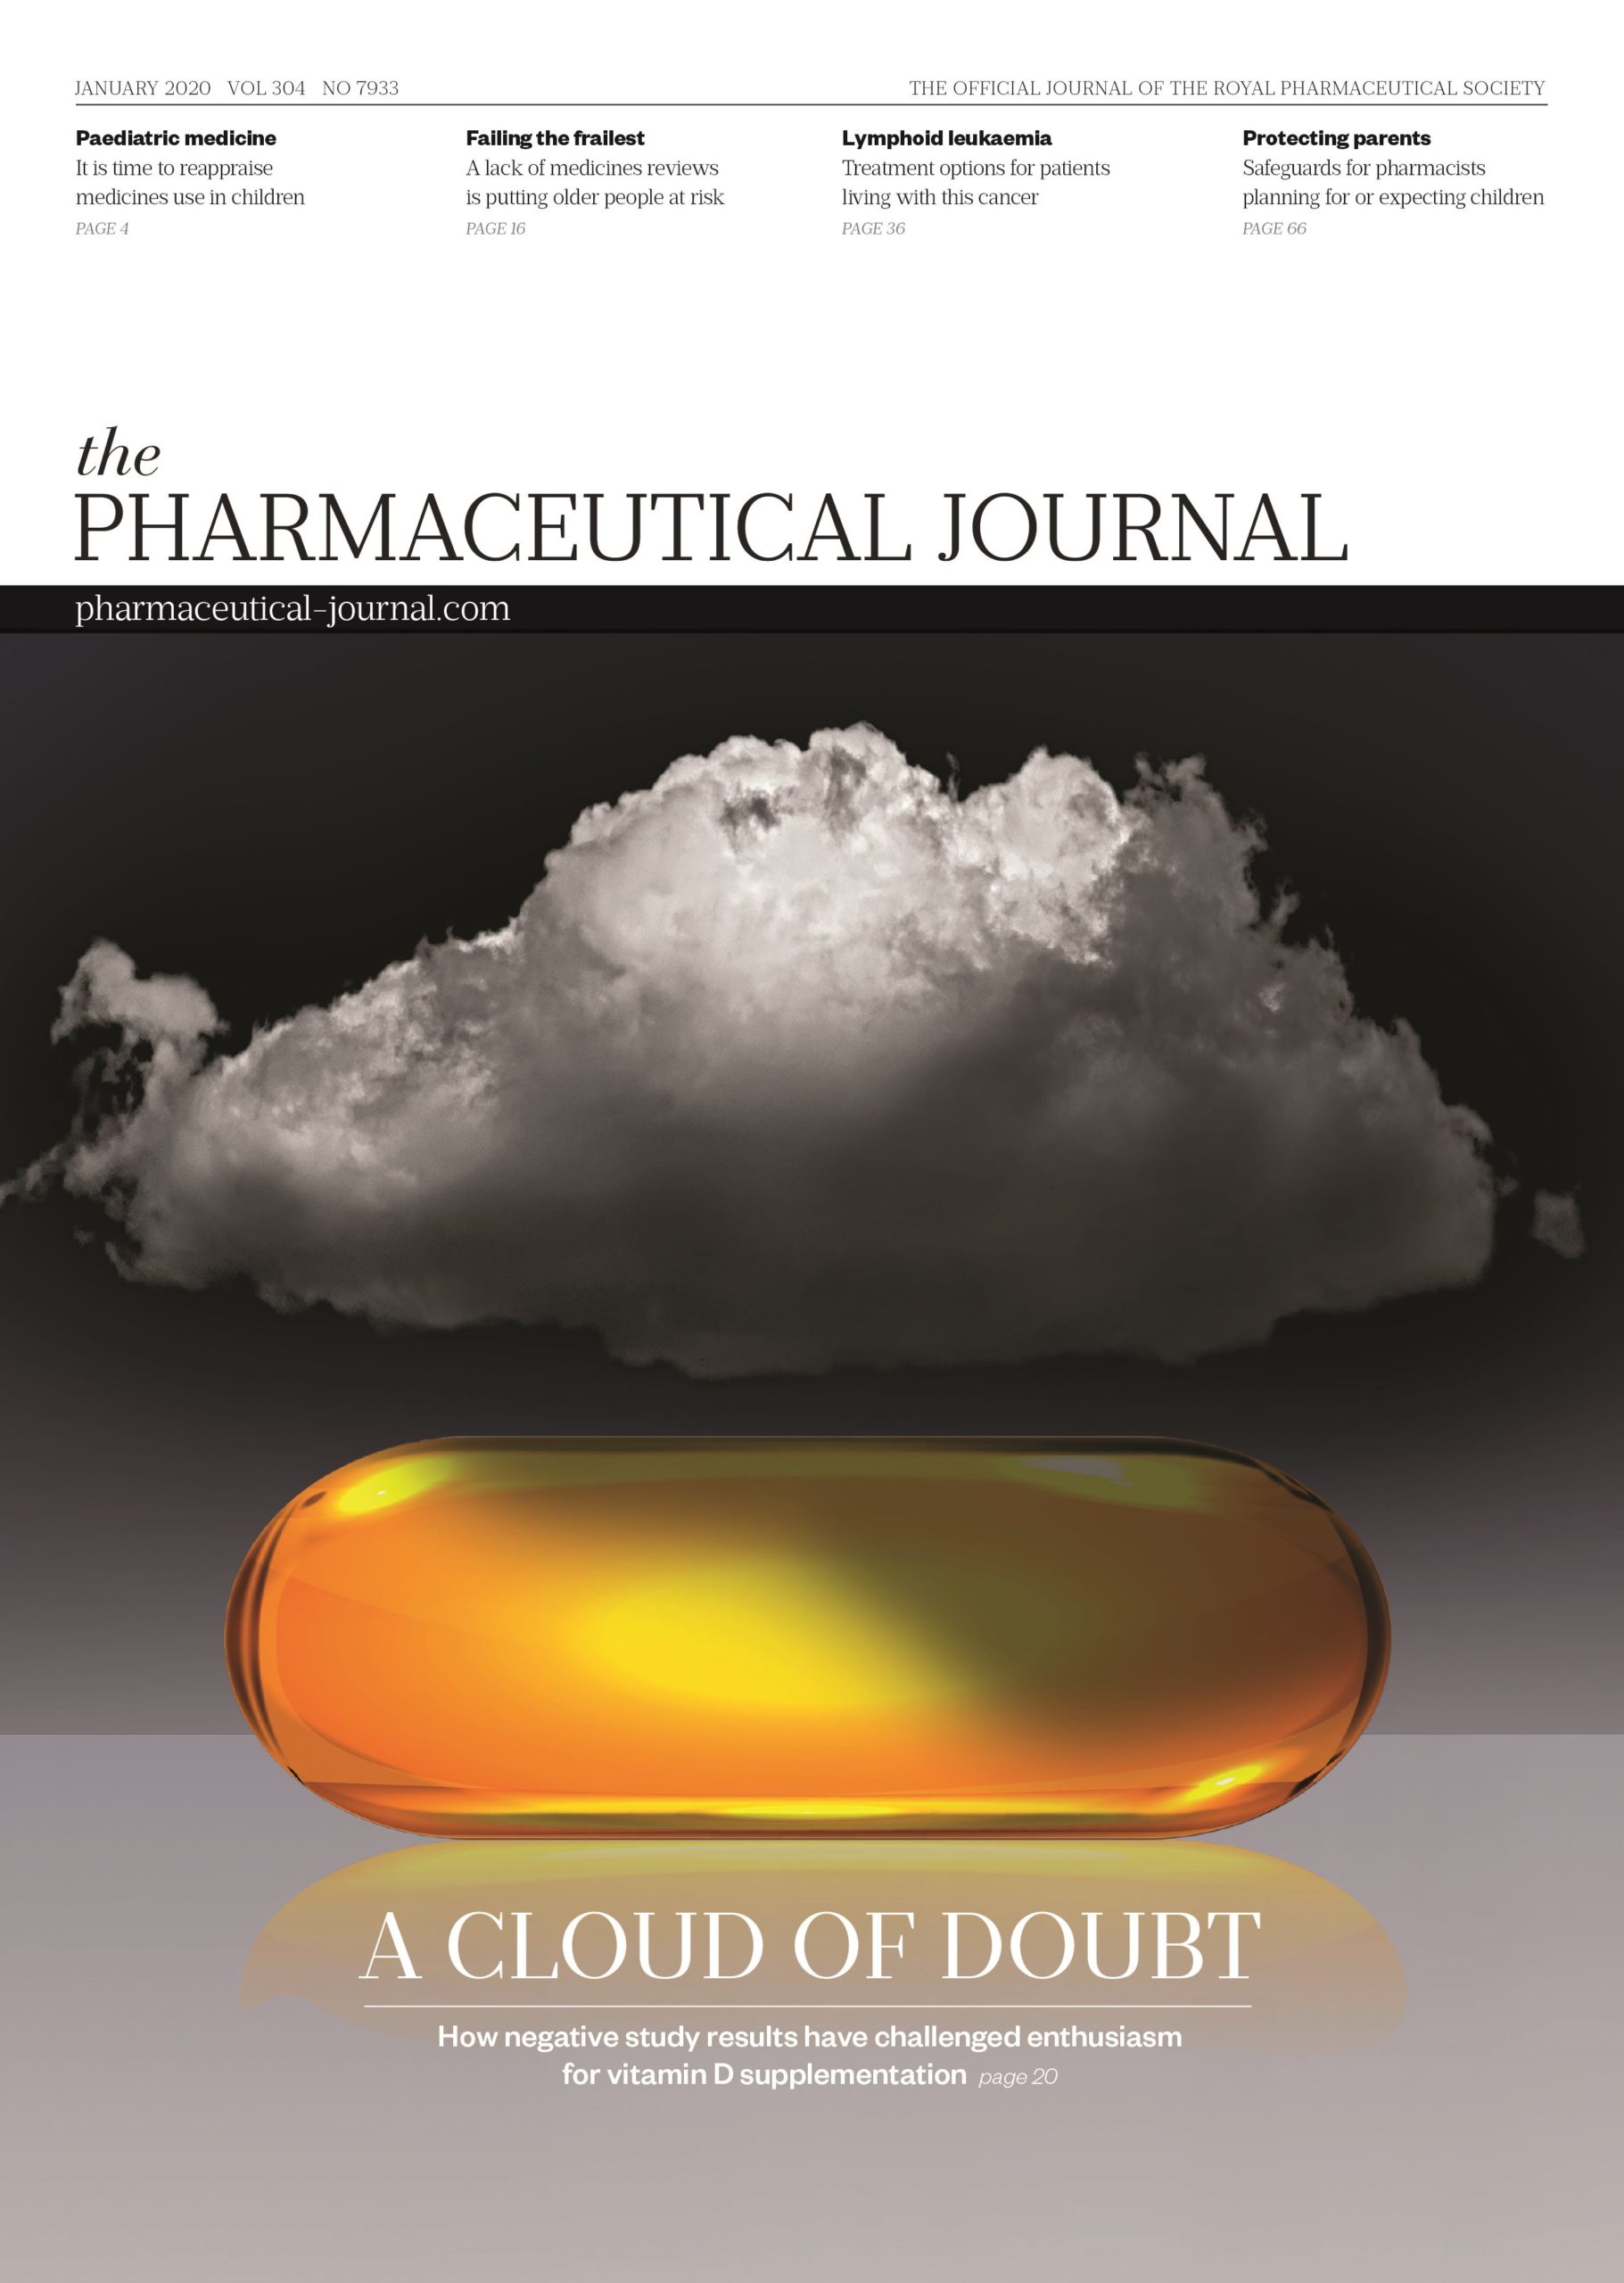 Publication issue cover for PJ, January 2020, Vol 304, No 7933